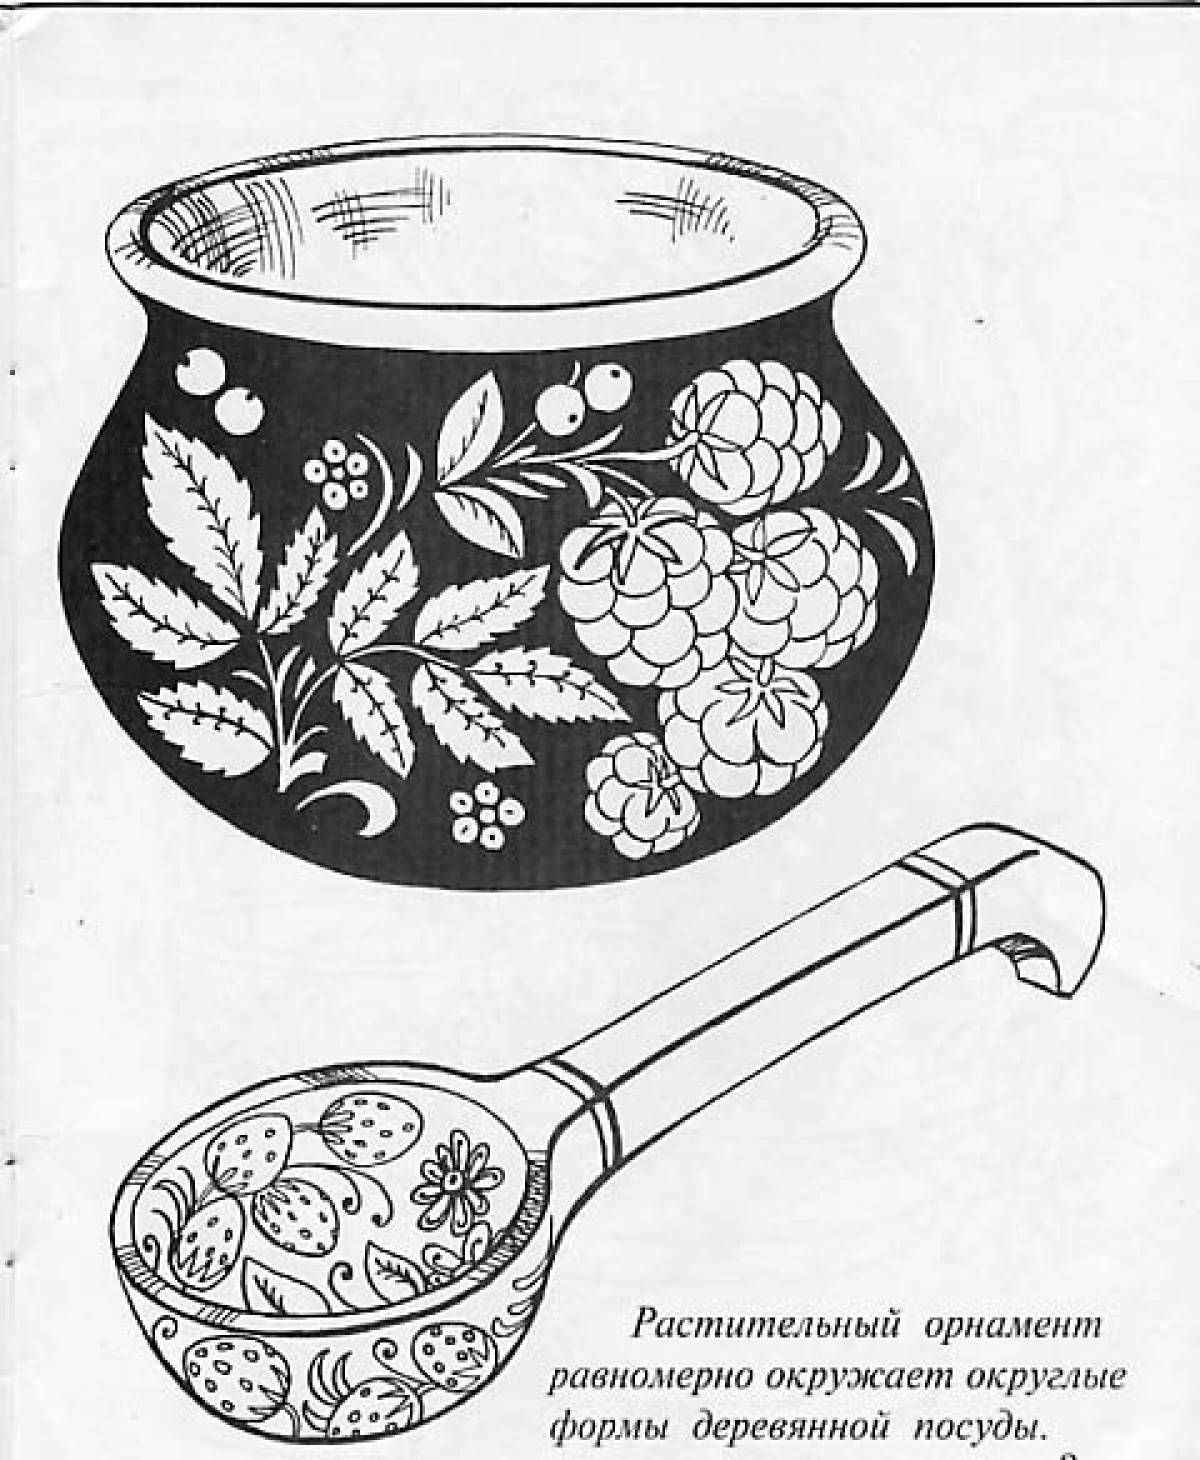 Pot with spoon